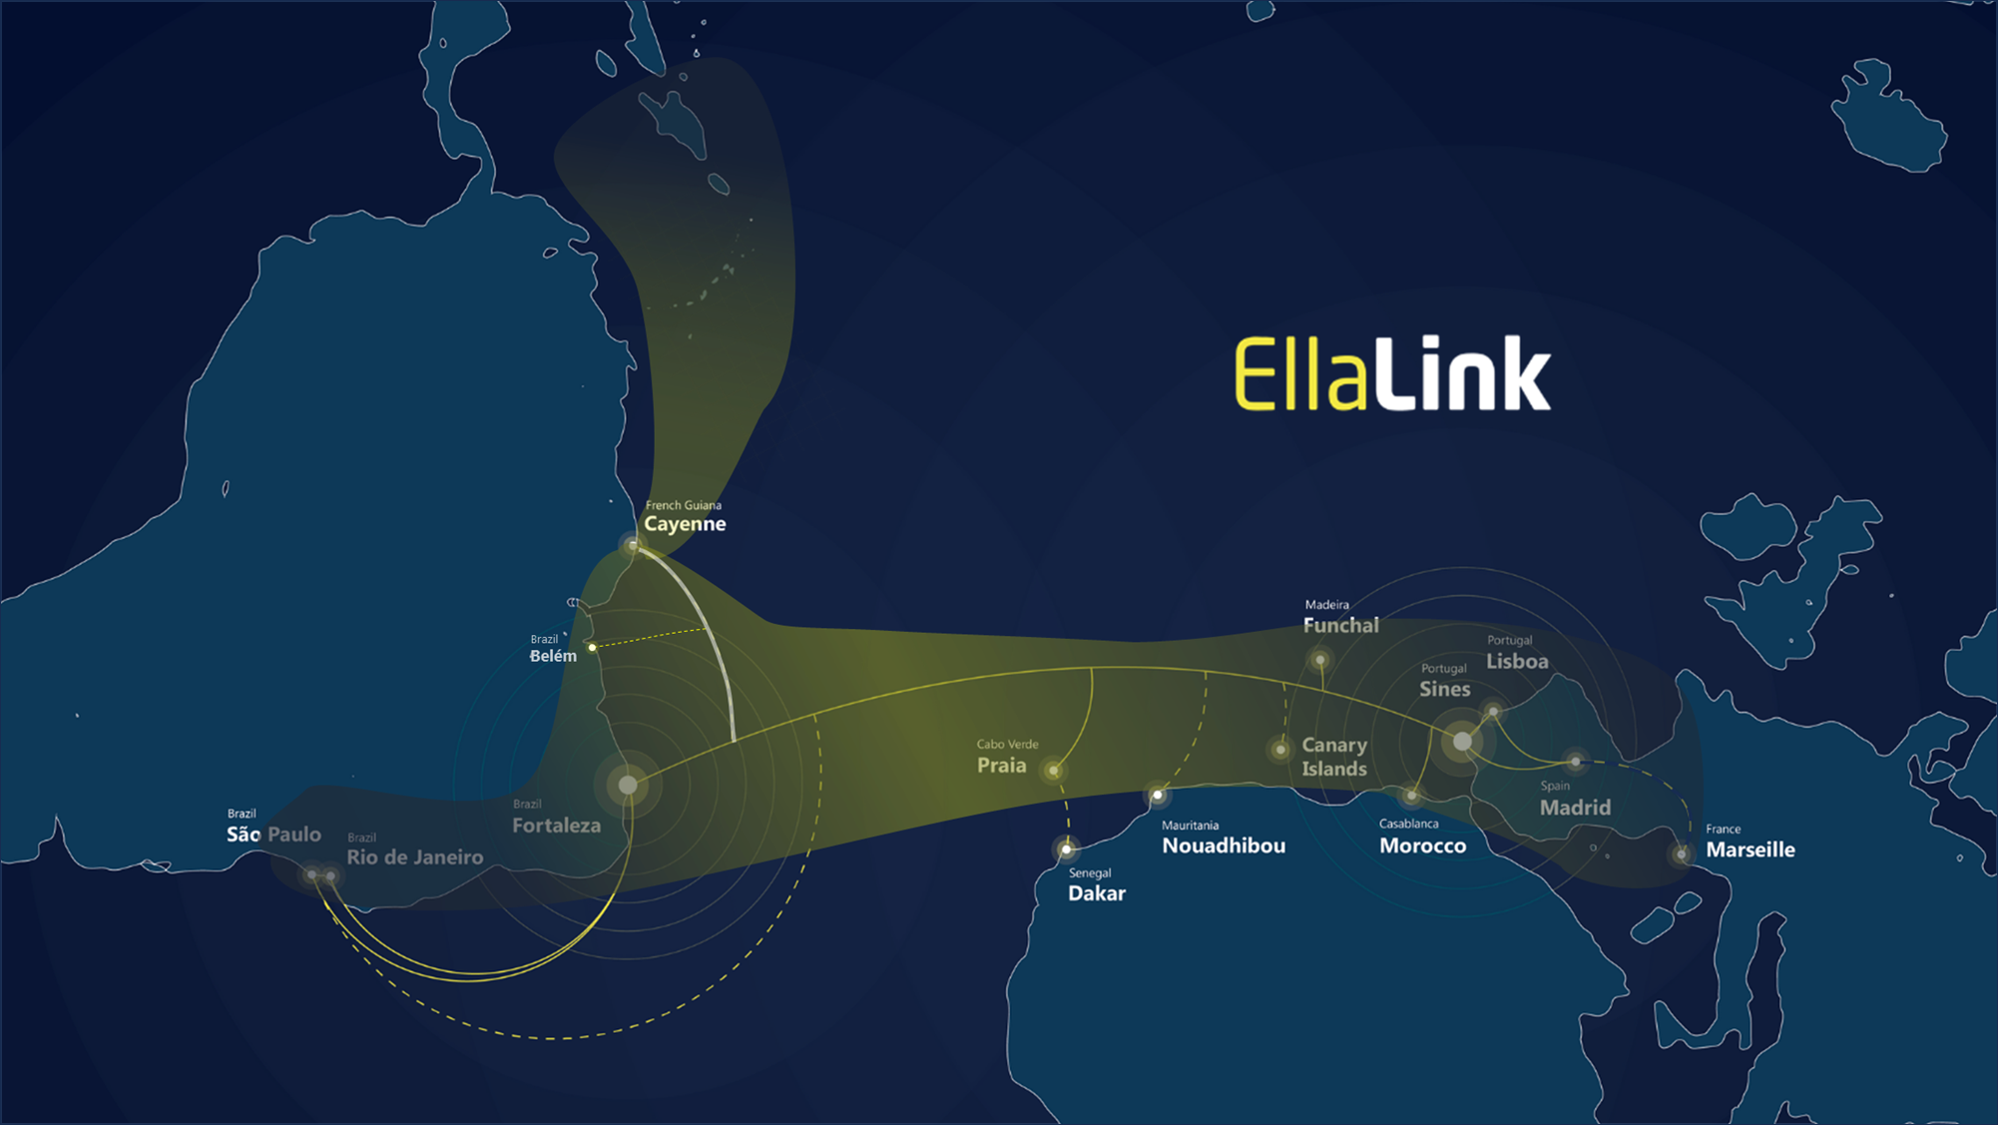 EllaLink main cable and new branch to French Guiana